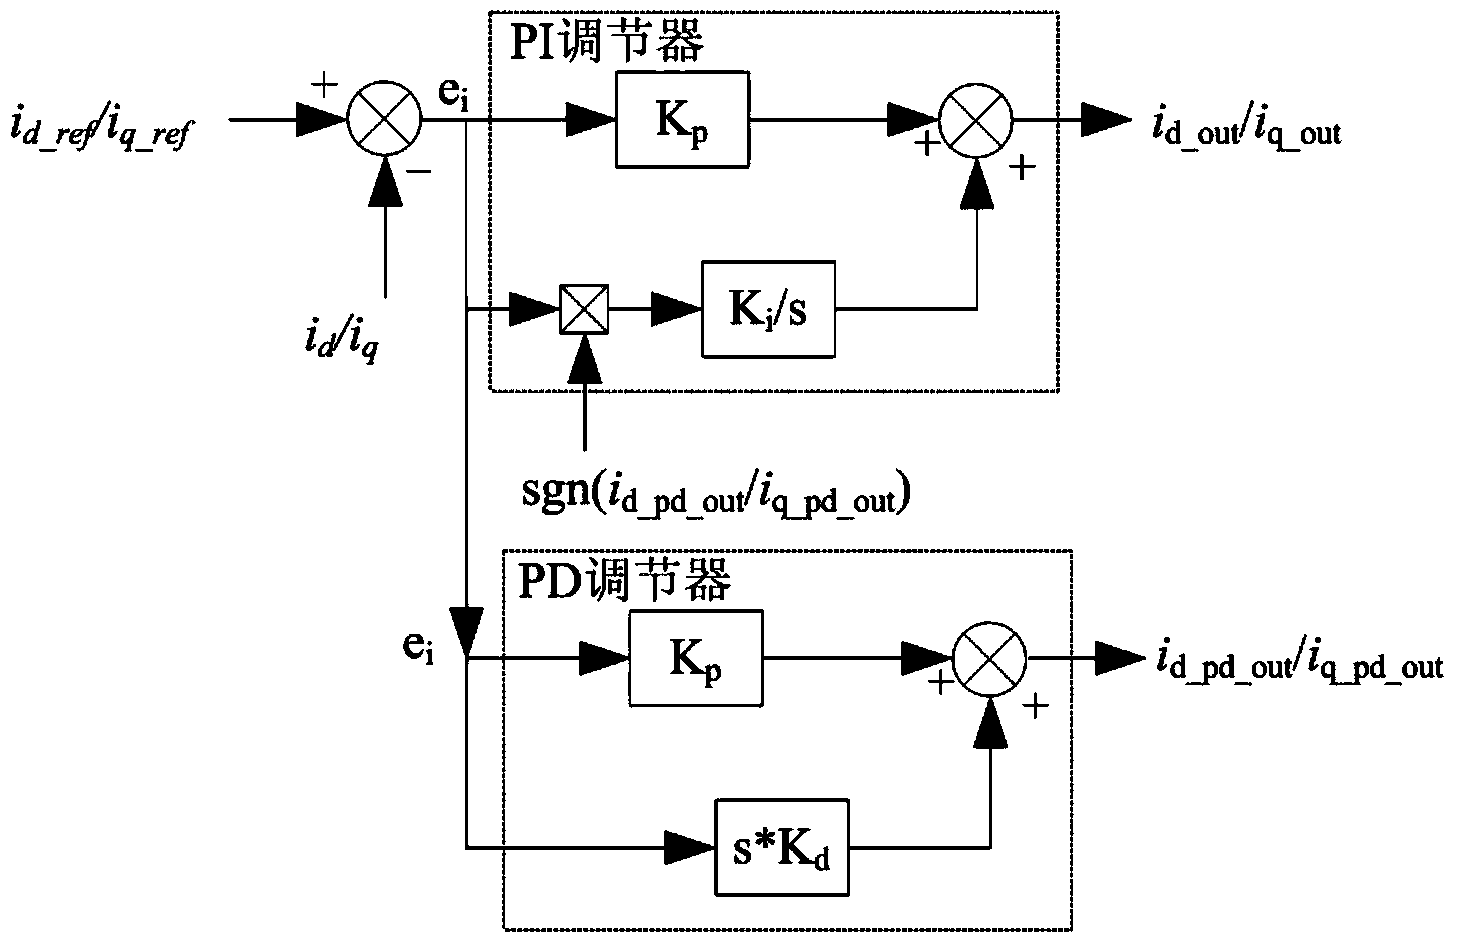 Control method for direct current voltage of grid-side converter of high-voltage doubly-fed power generation system